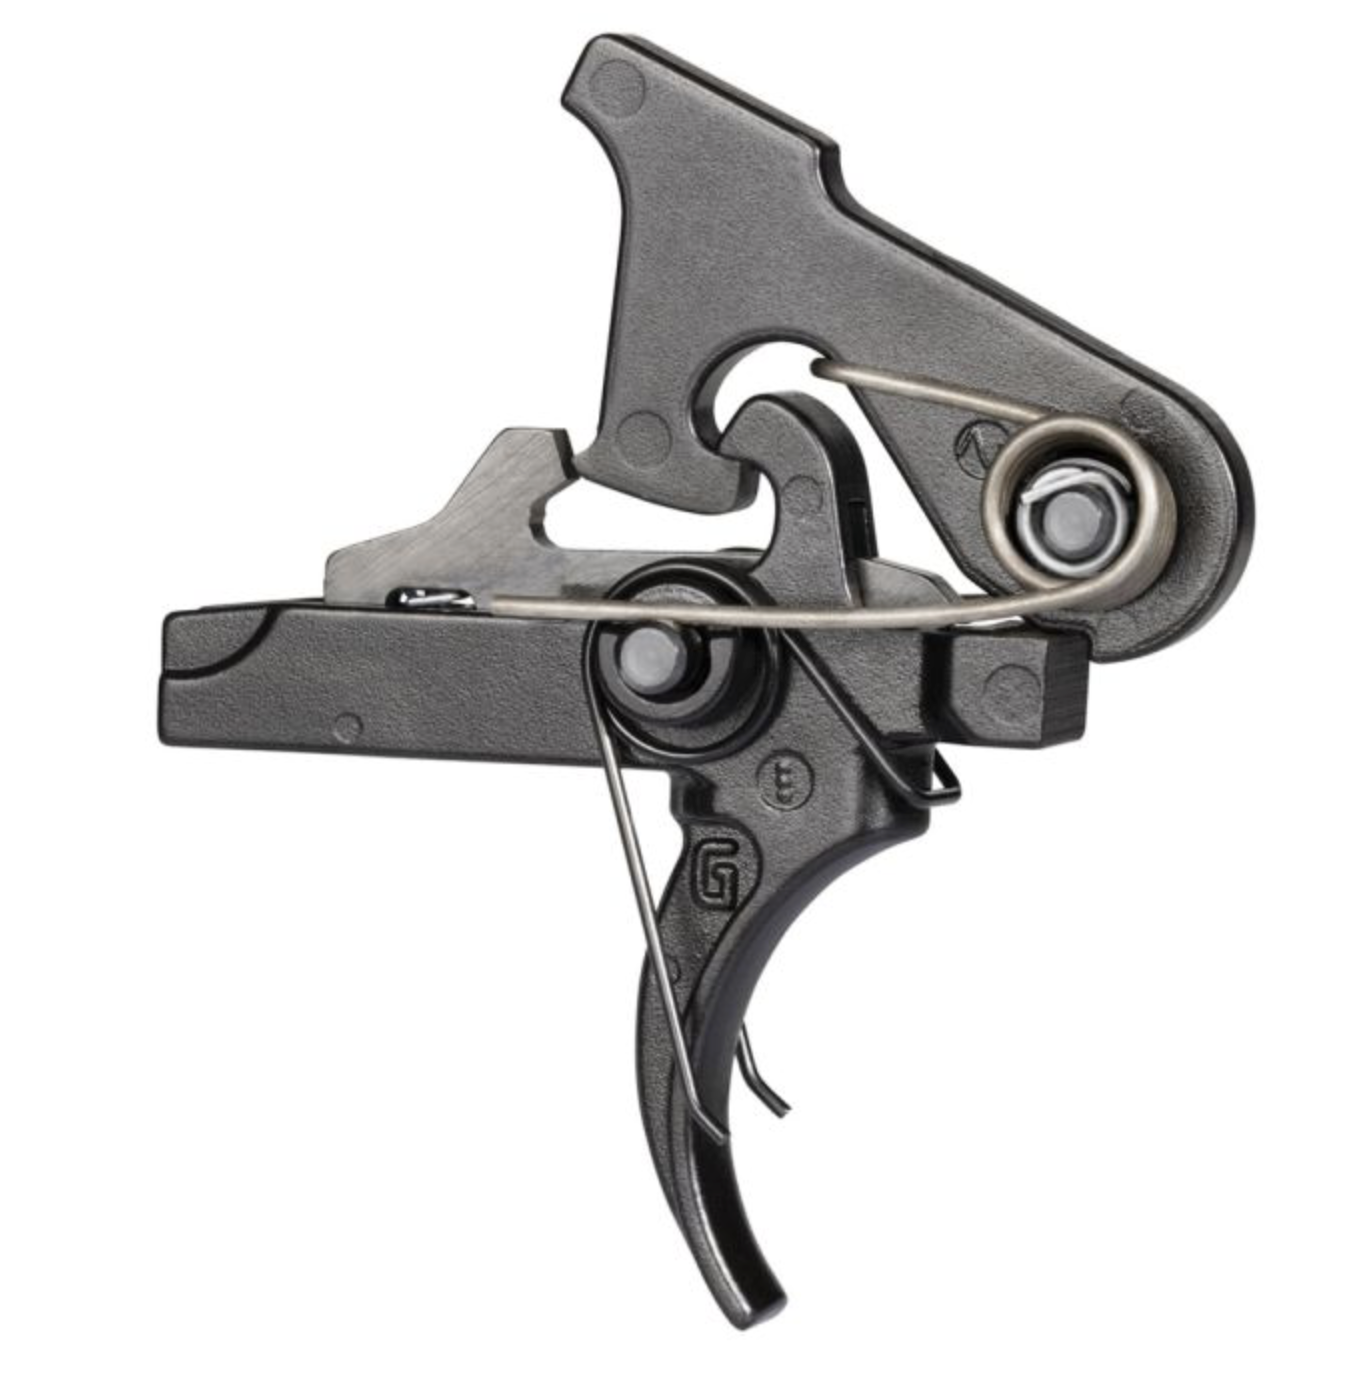 Geissele - 2 Stage (G2S) Trigger